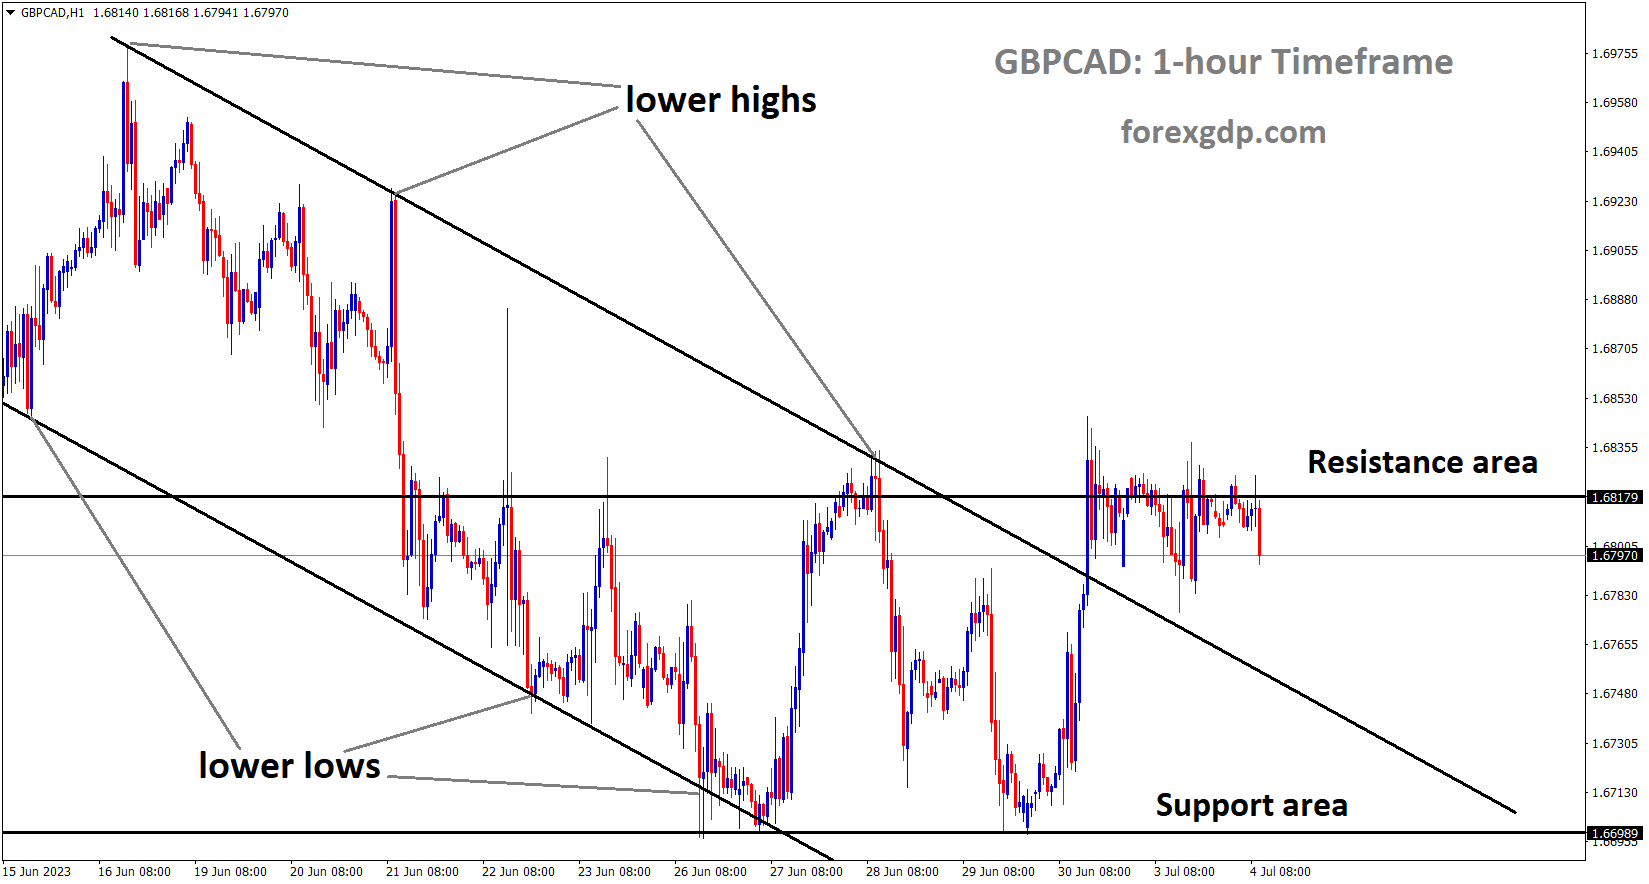 GBPCAD is moving in the Descending channel and the market has reached the lower high area of the channel